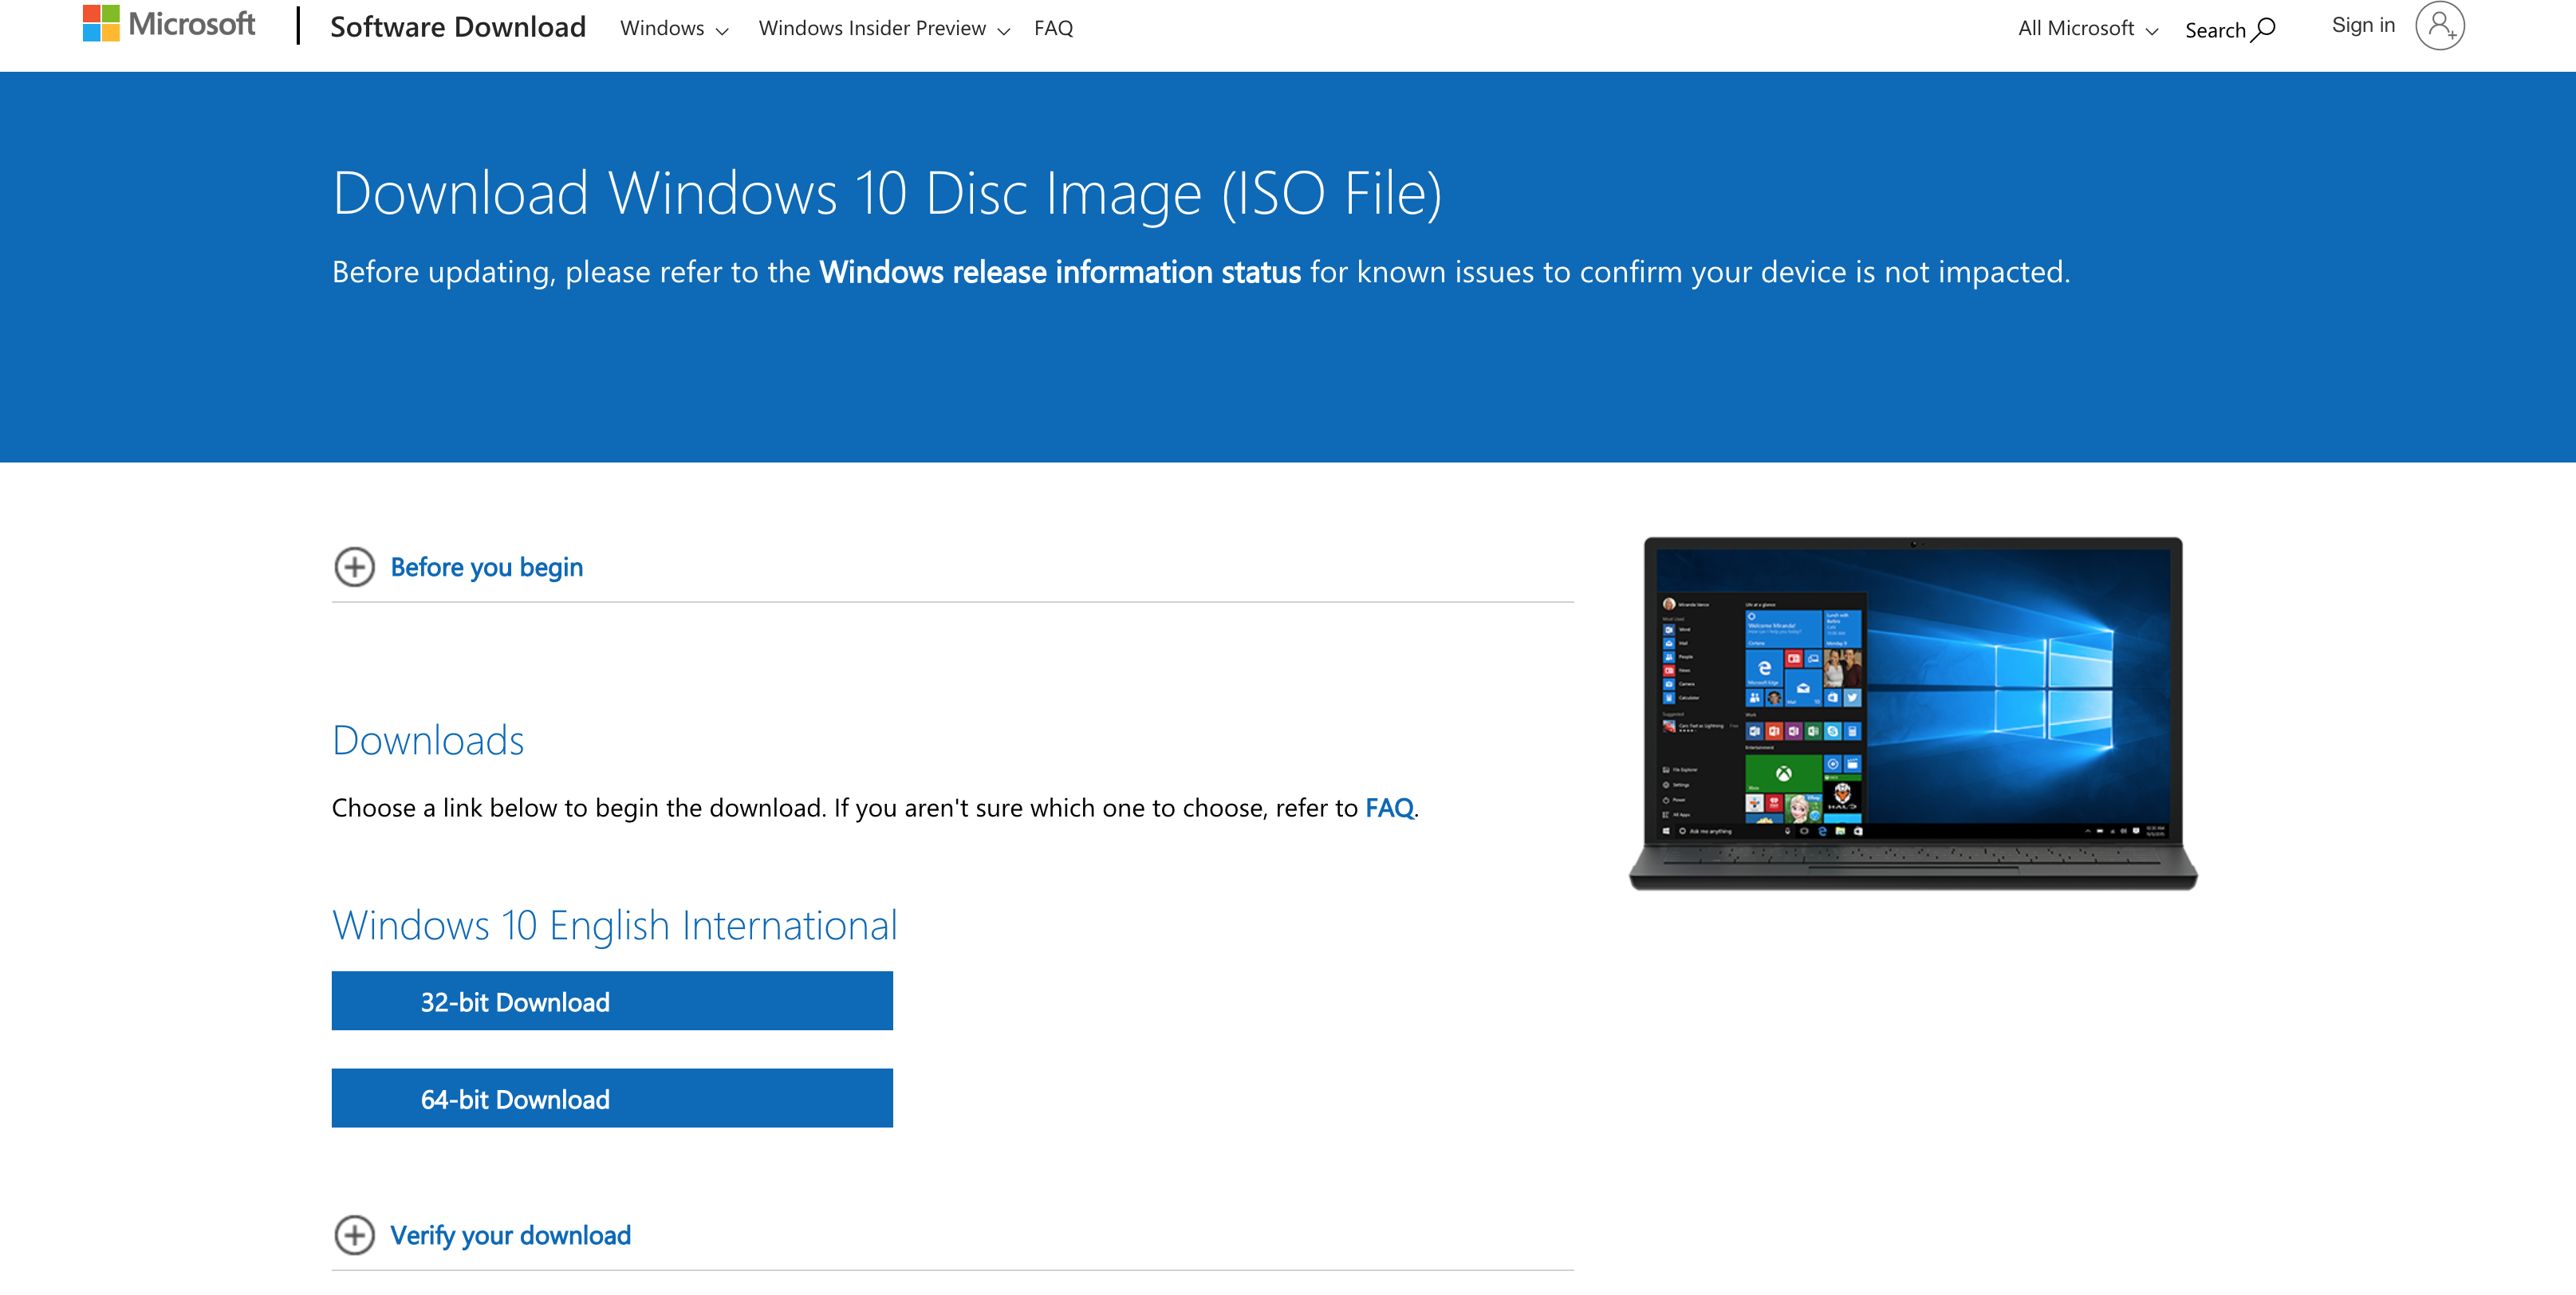 Download The Windows 10 Iso Image